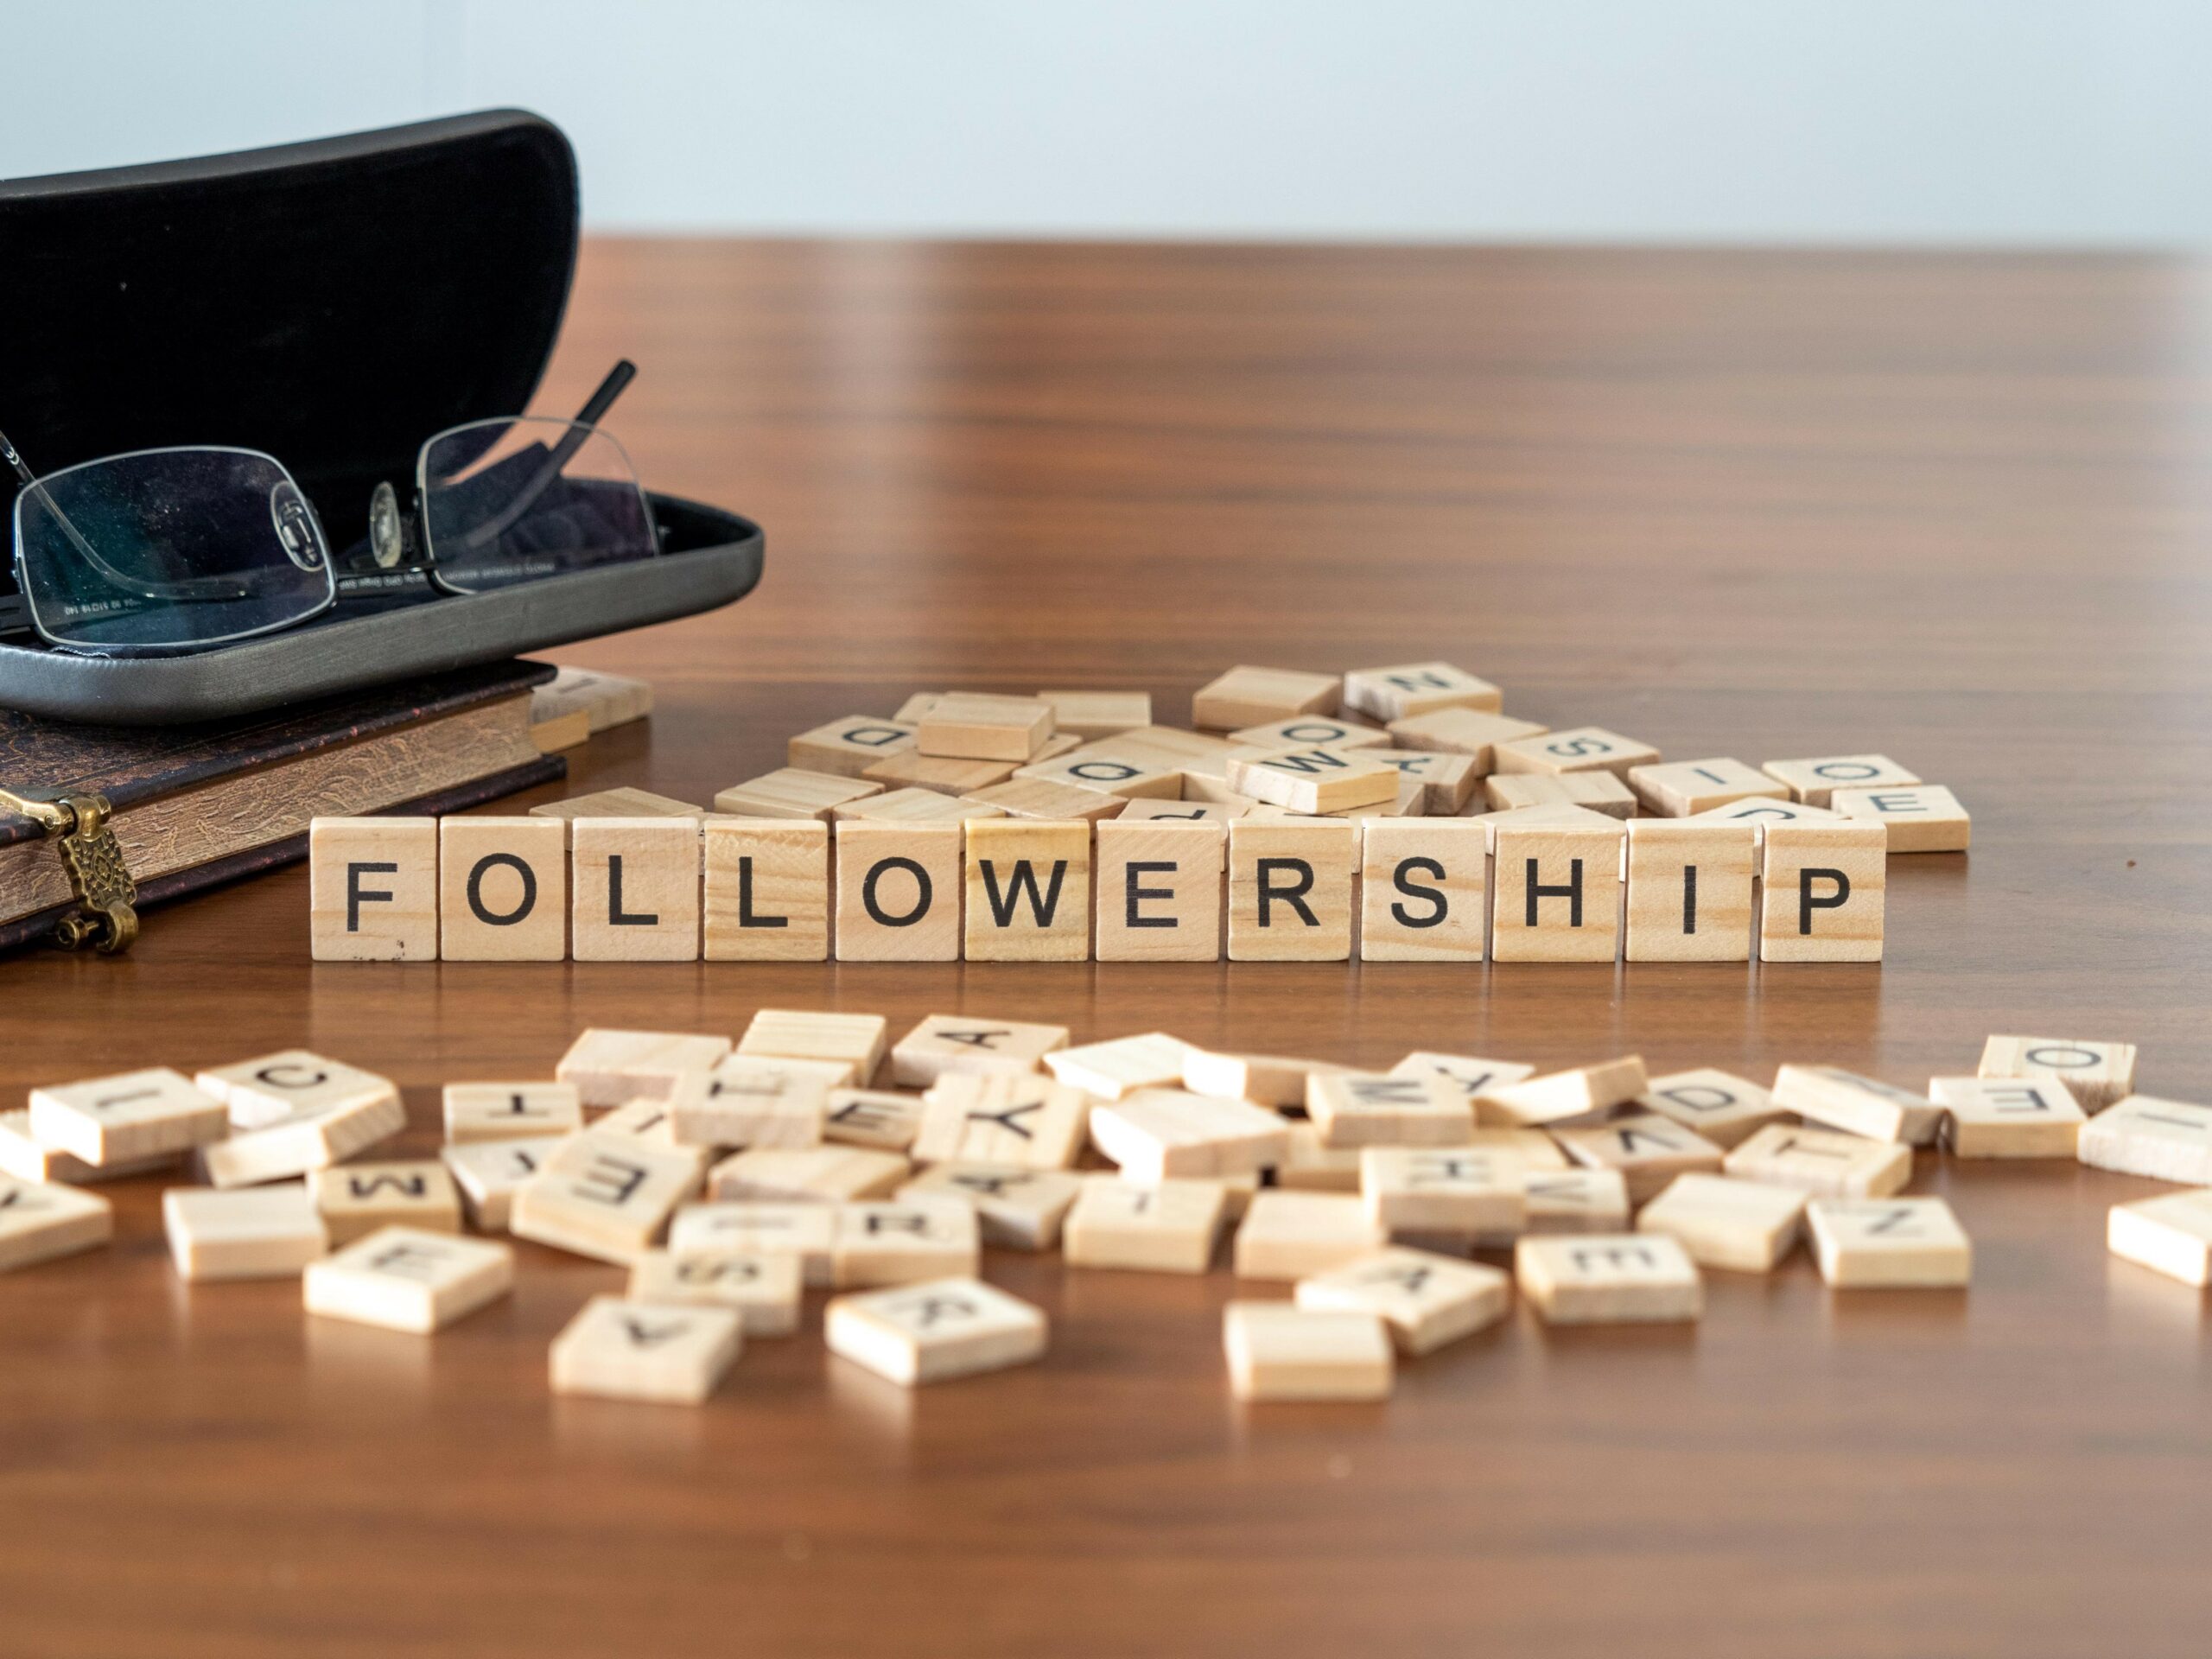 followership is not a bad word